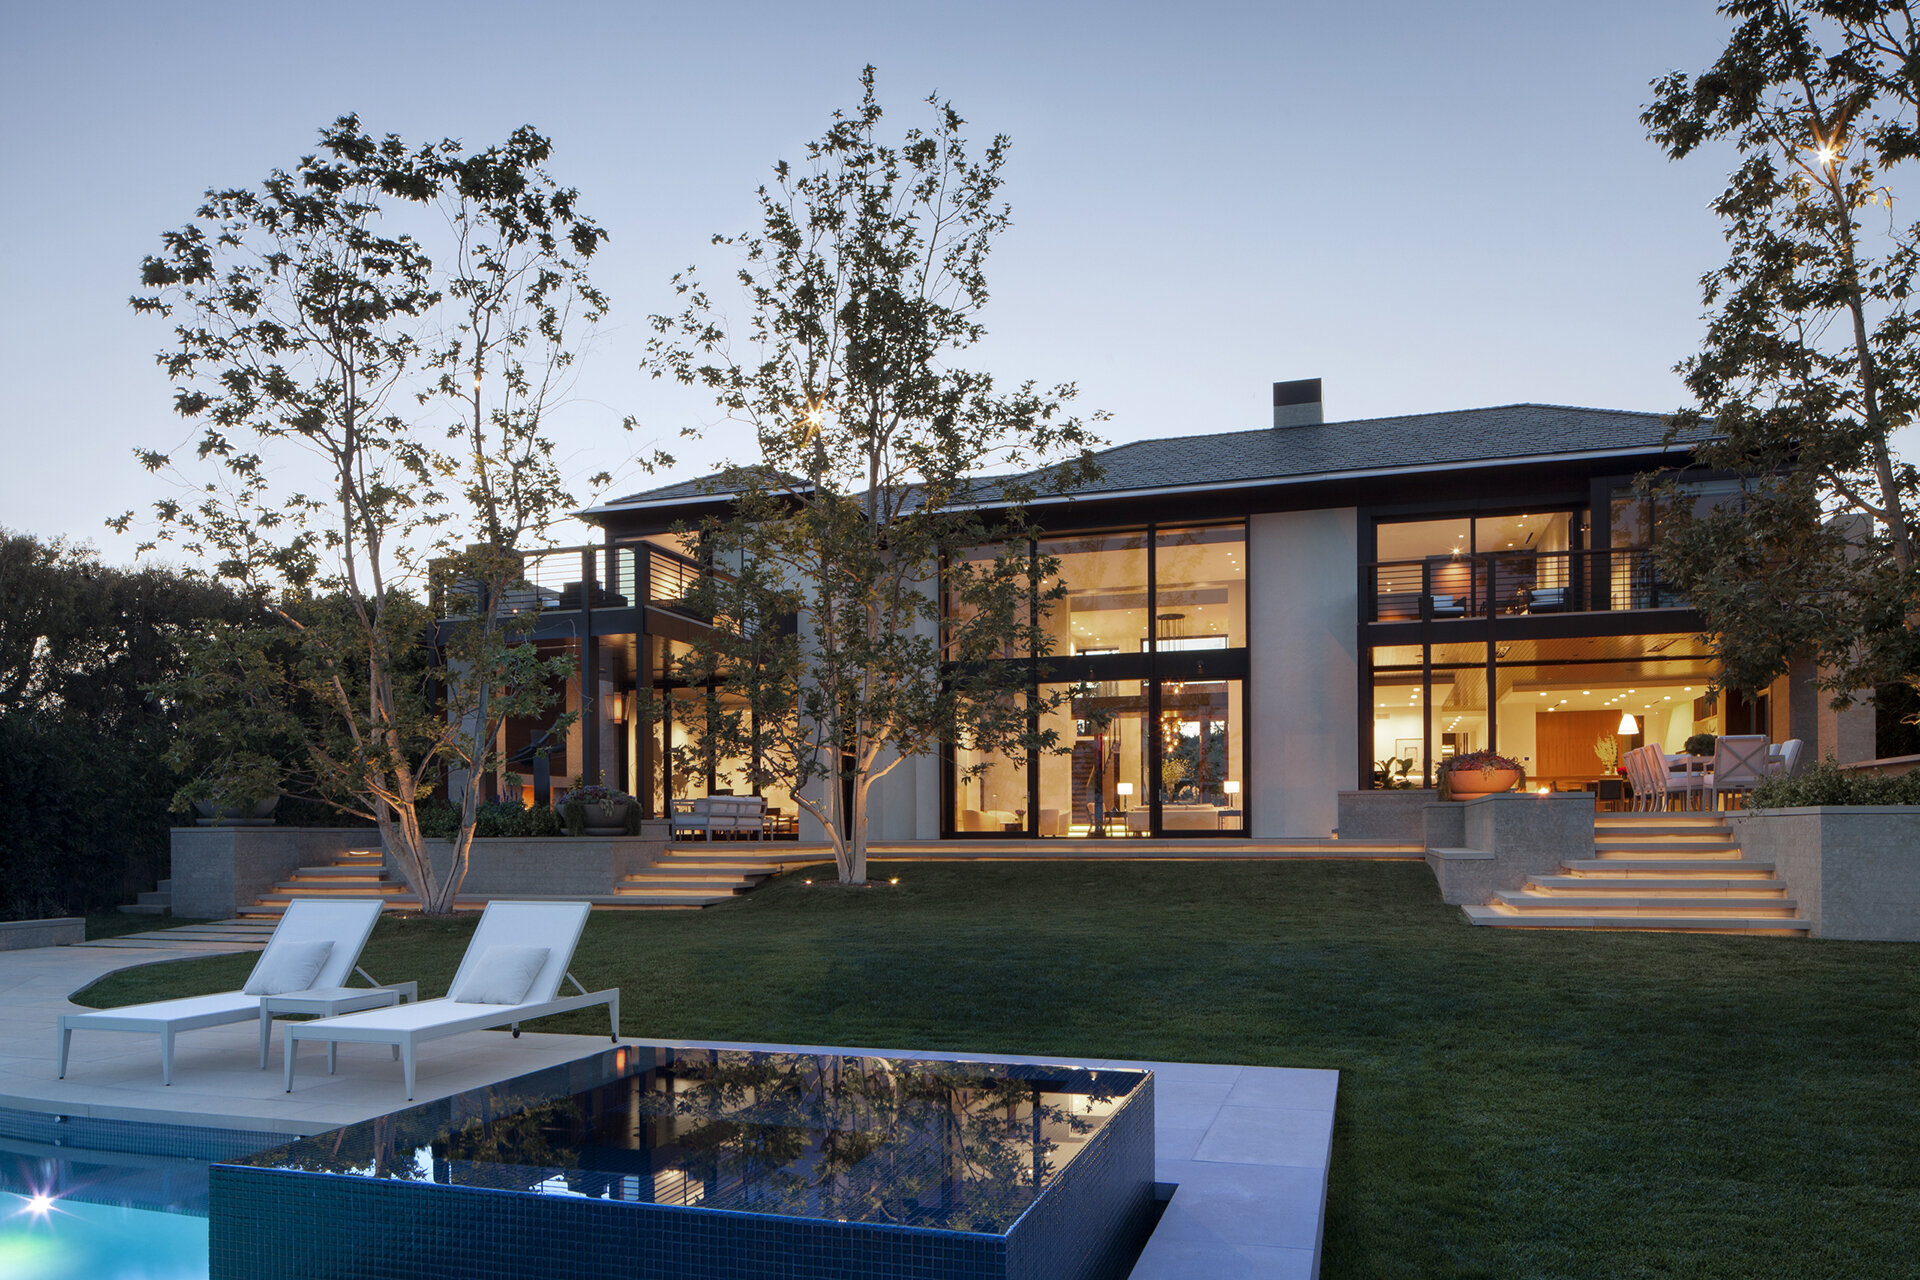  Luxury contemporary modern highest quality builder and general contractor custom home in the Pacific Palisades neighborhood of Los Angeles featuring architectural residence on golf course.  